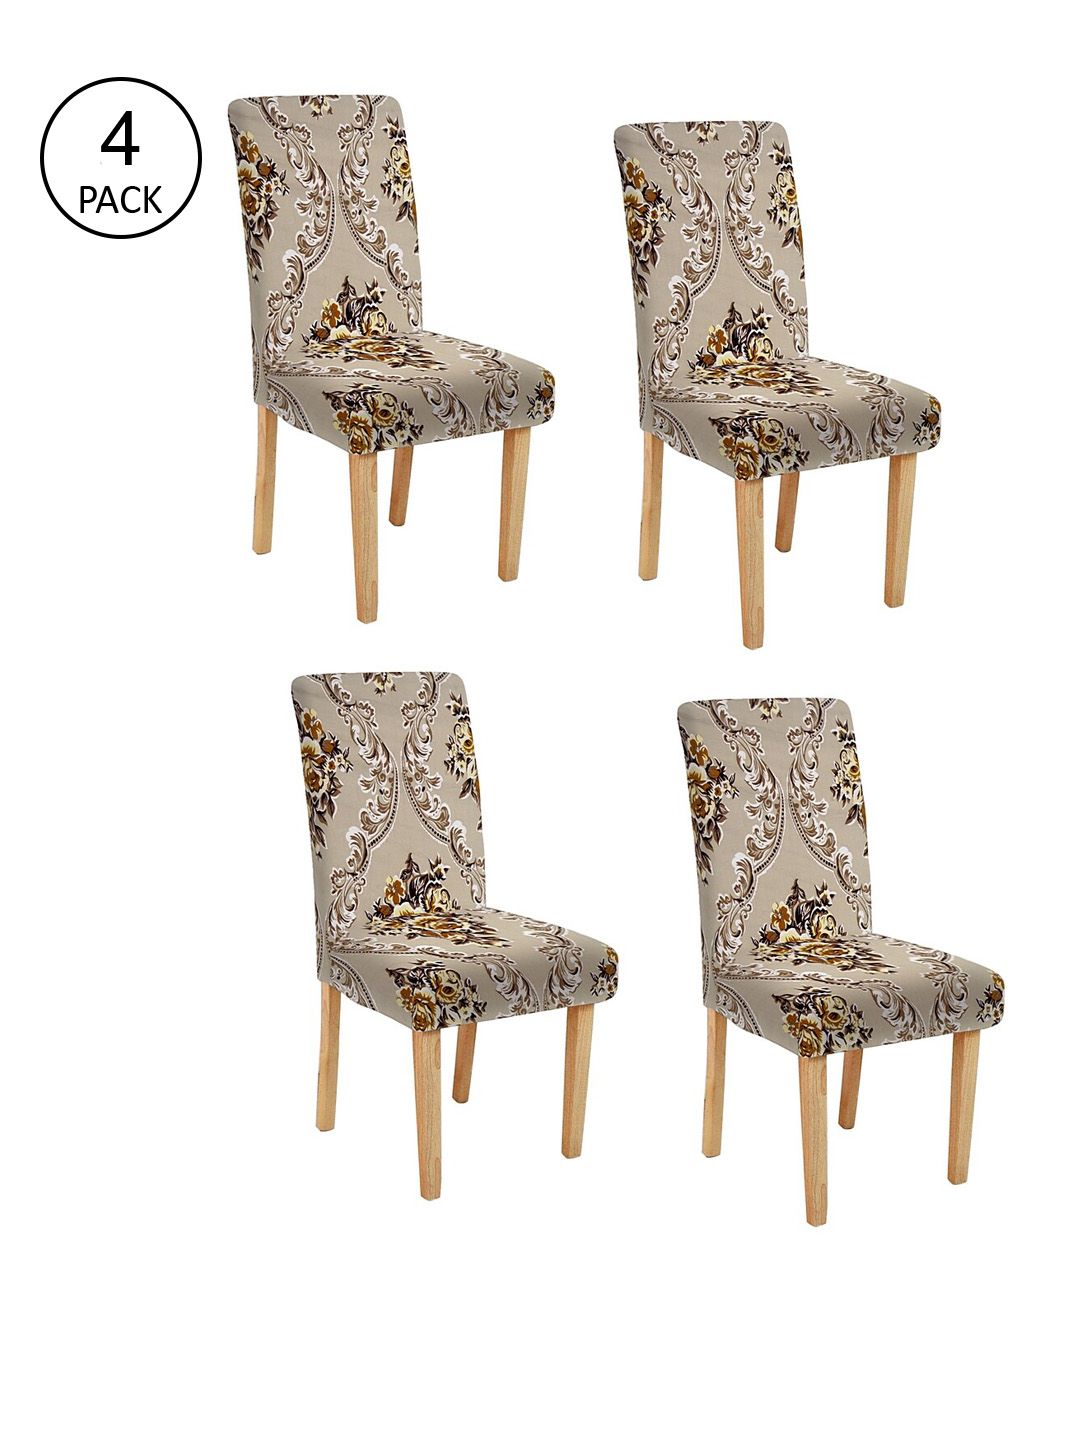 Cortina Set Of 4 Beige & Brown Printed Chair Covers Price in India